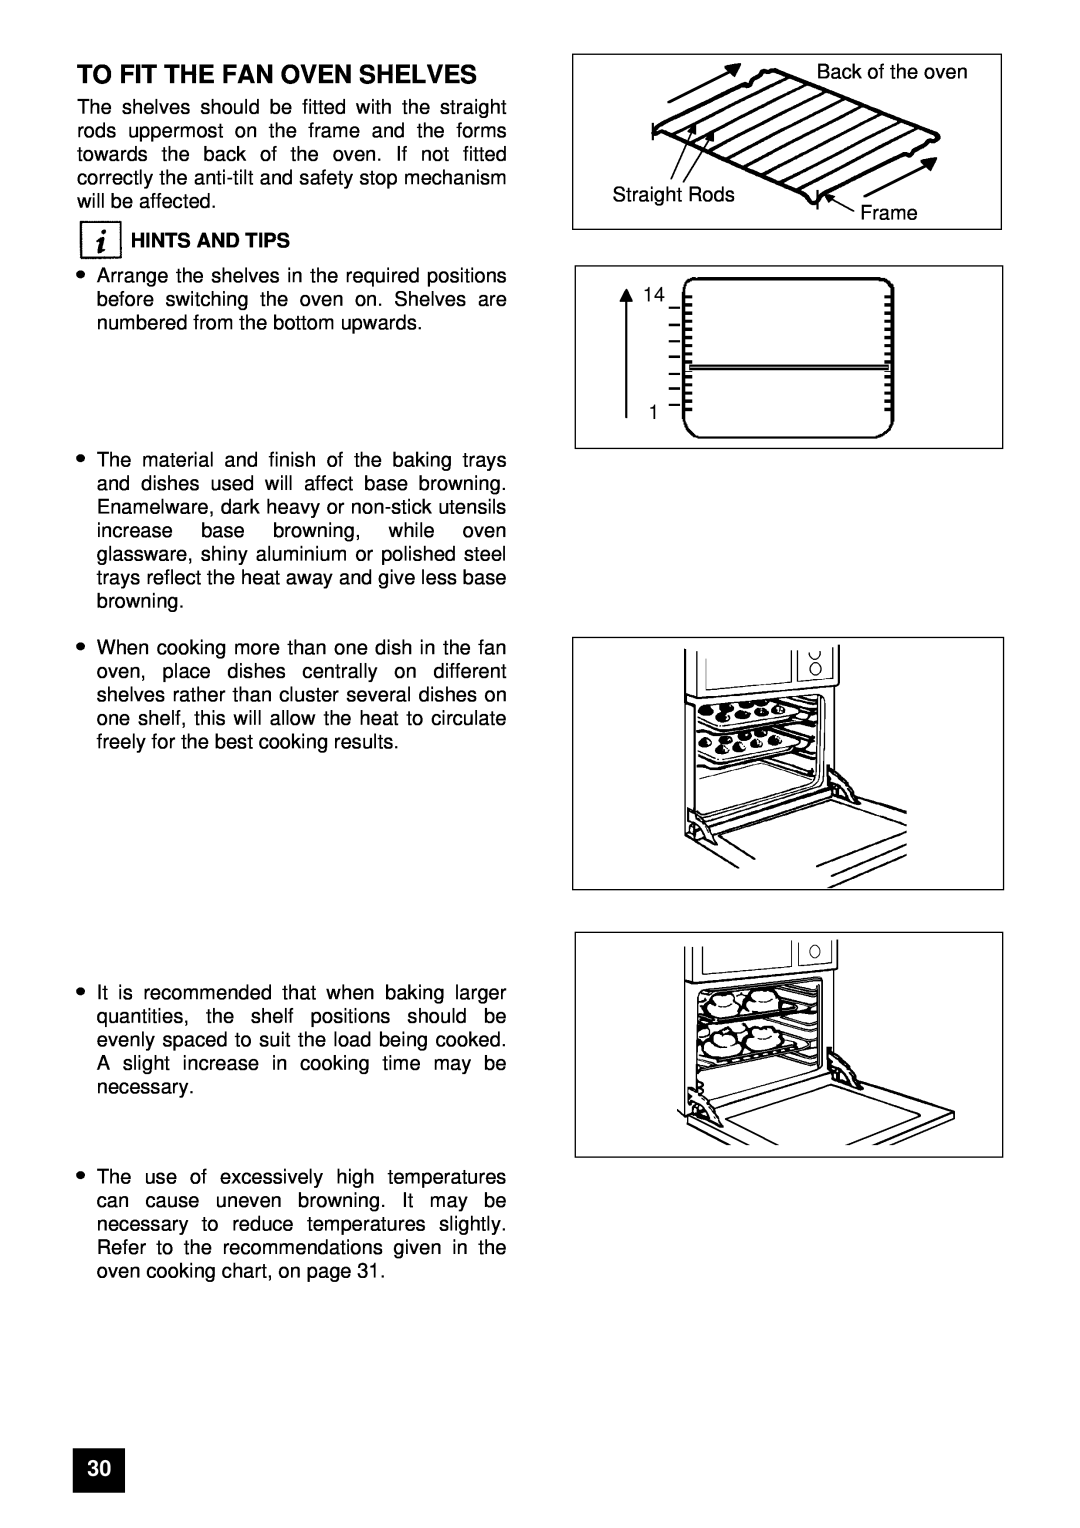 Tricity Bendix E 750 installation instructions To Fit The Fan Oven Shelves, Hints And Tips 